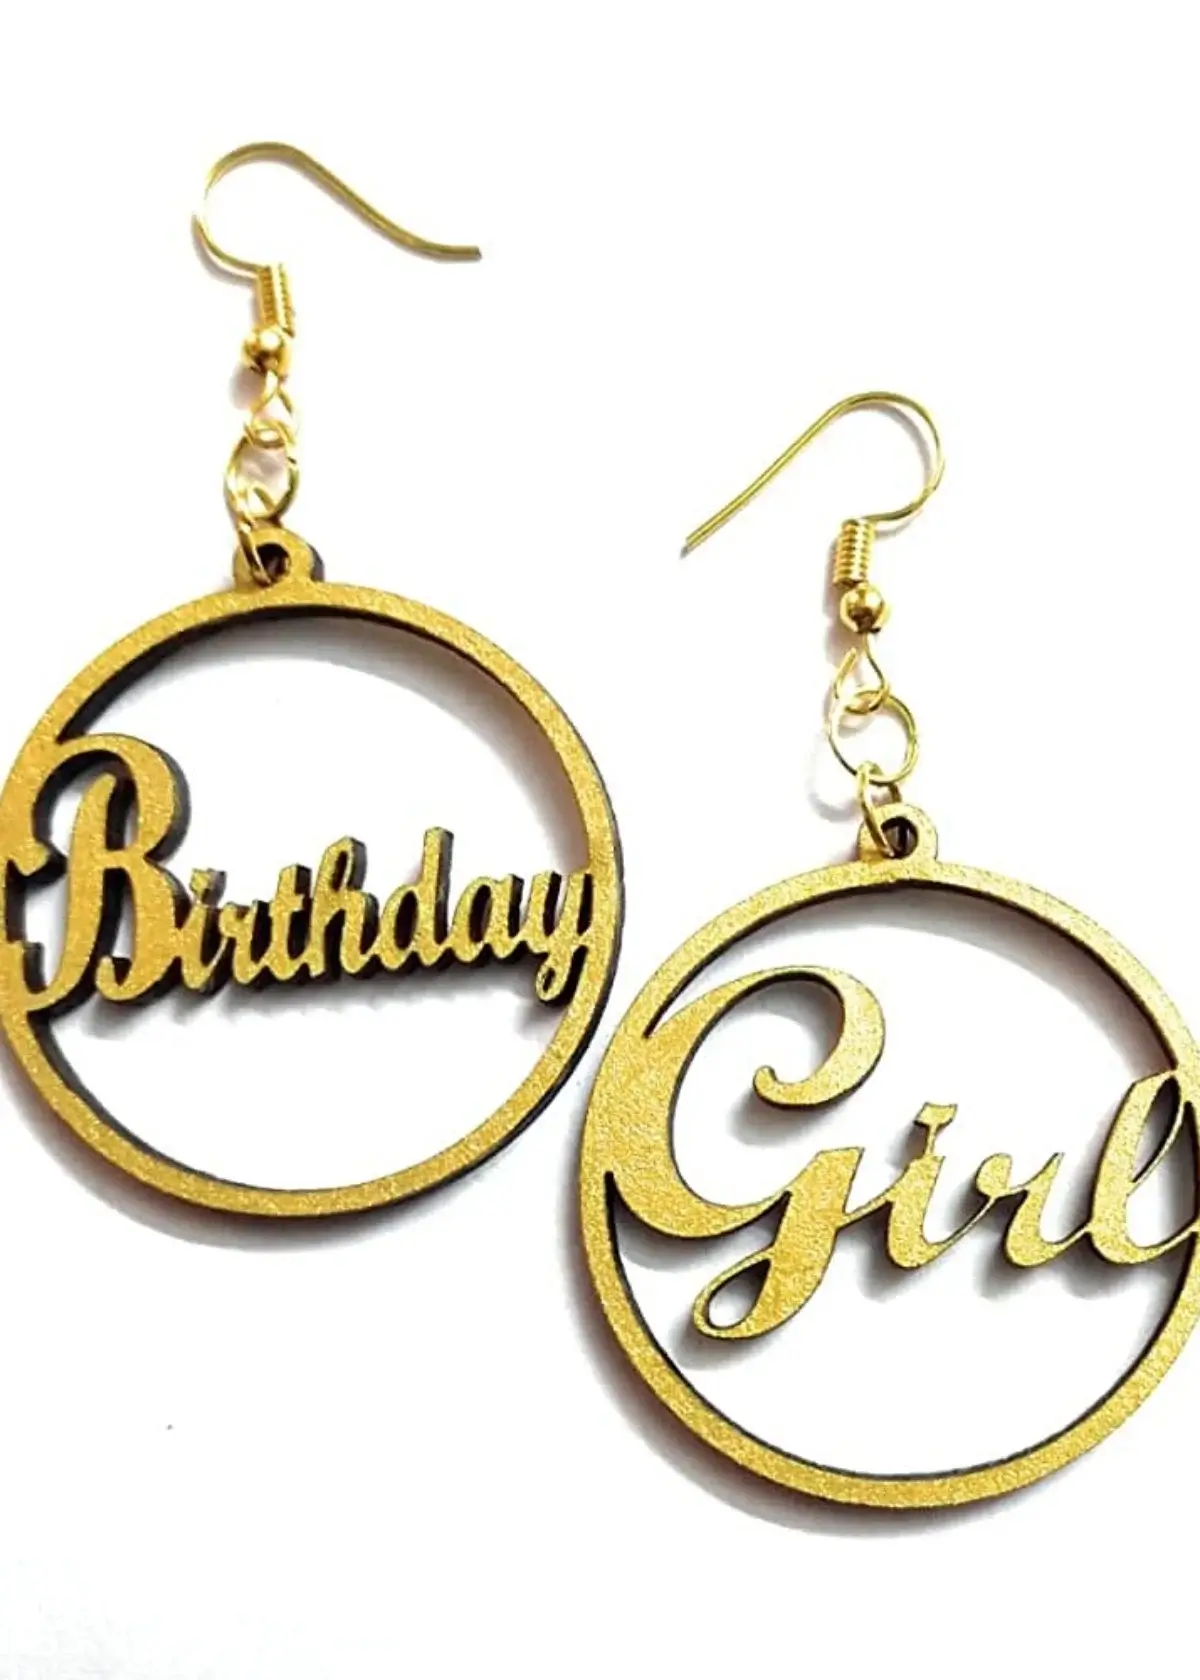 How to Choose the Right Birthday Earrings?